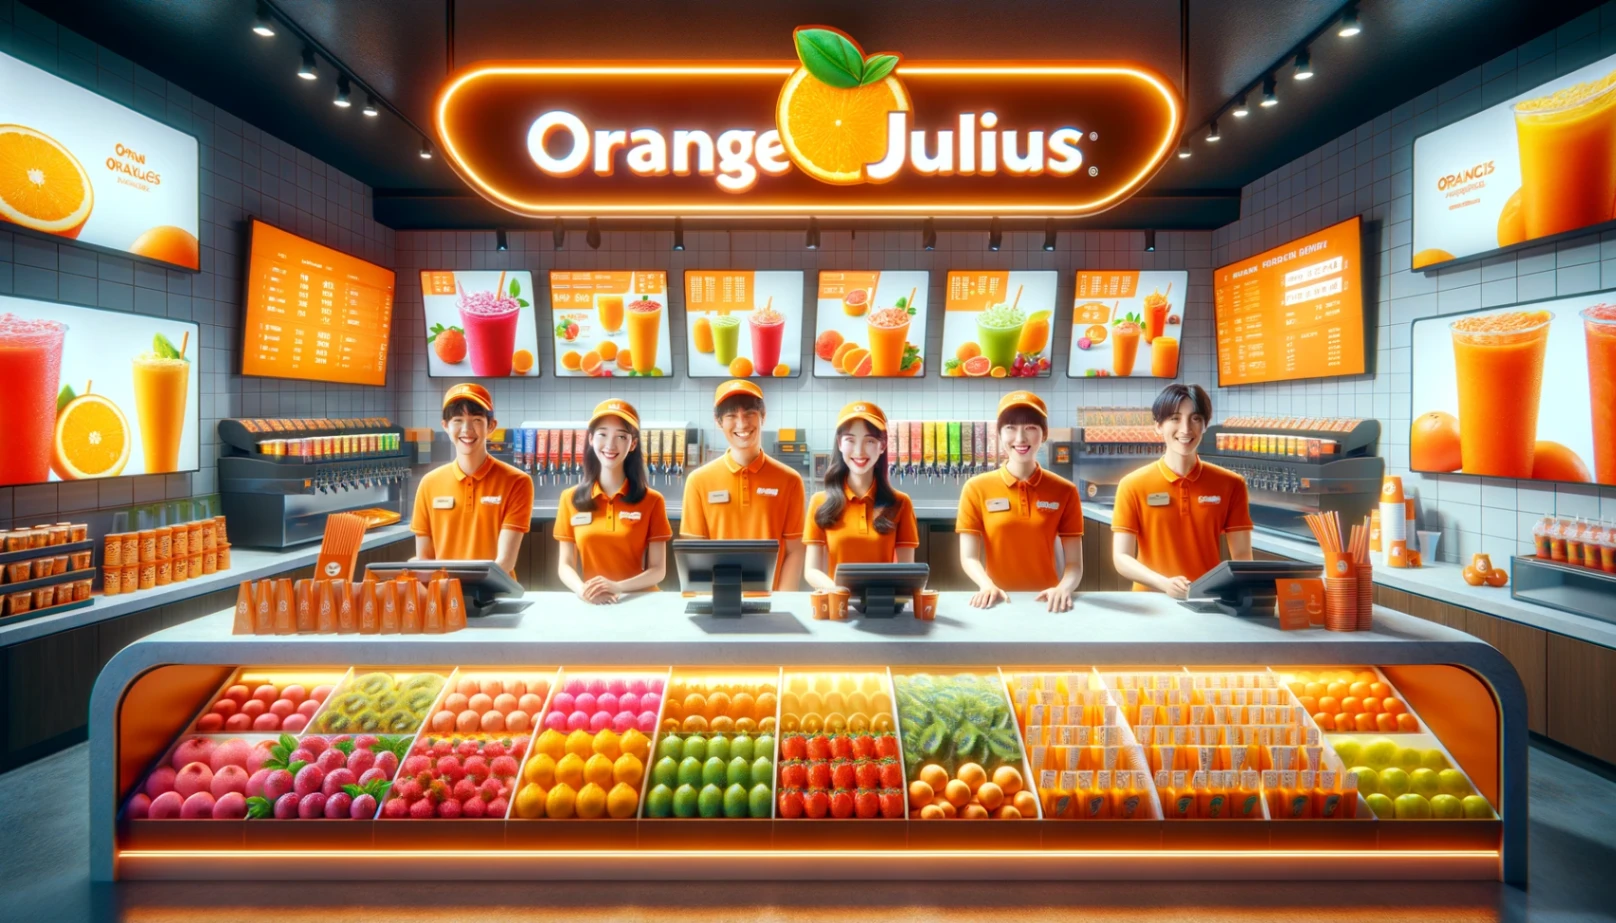 Orange Julius Positions Available: Learn How to Apply